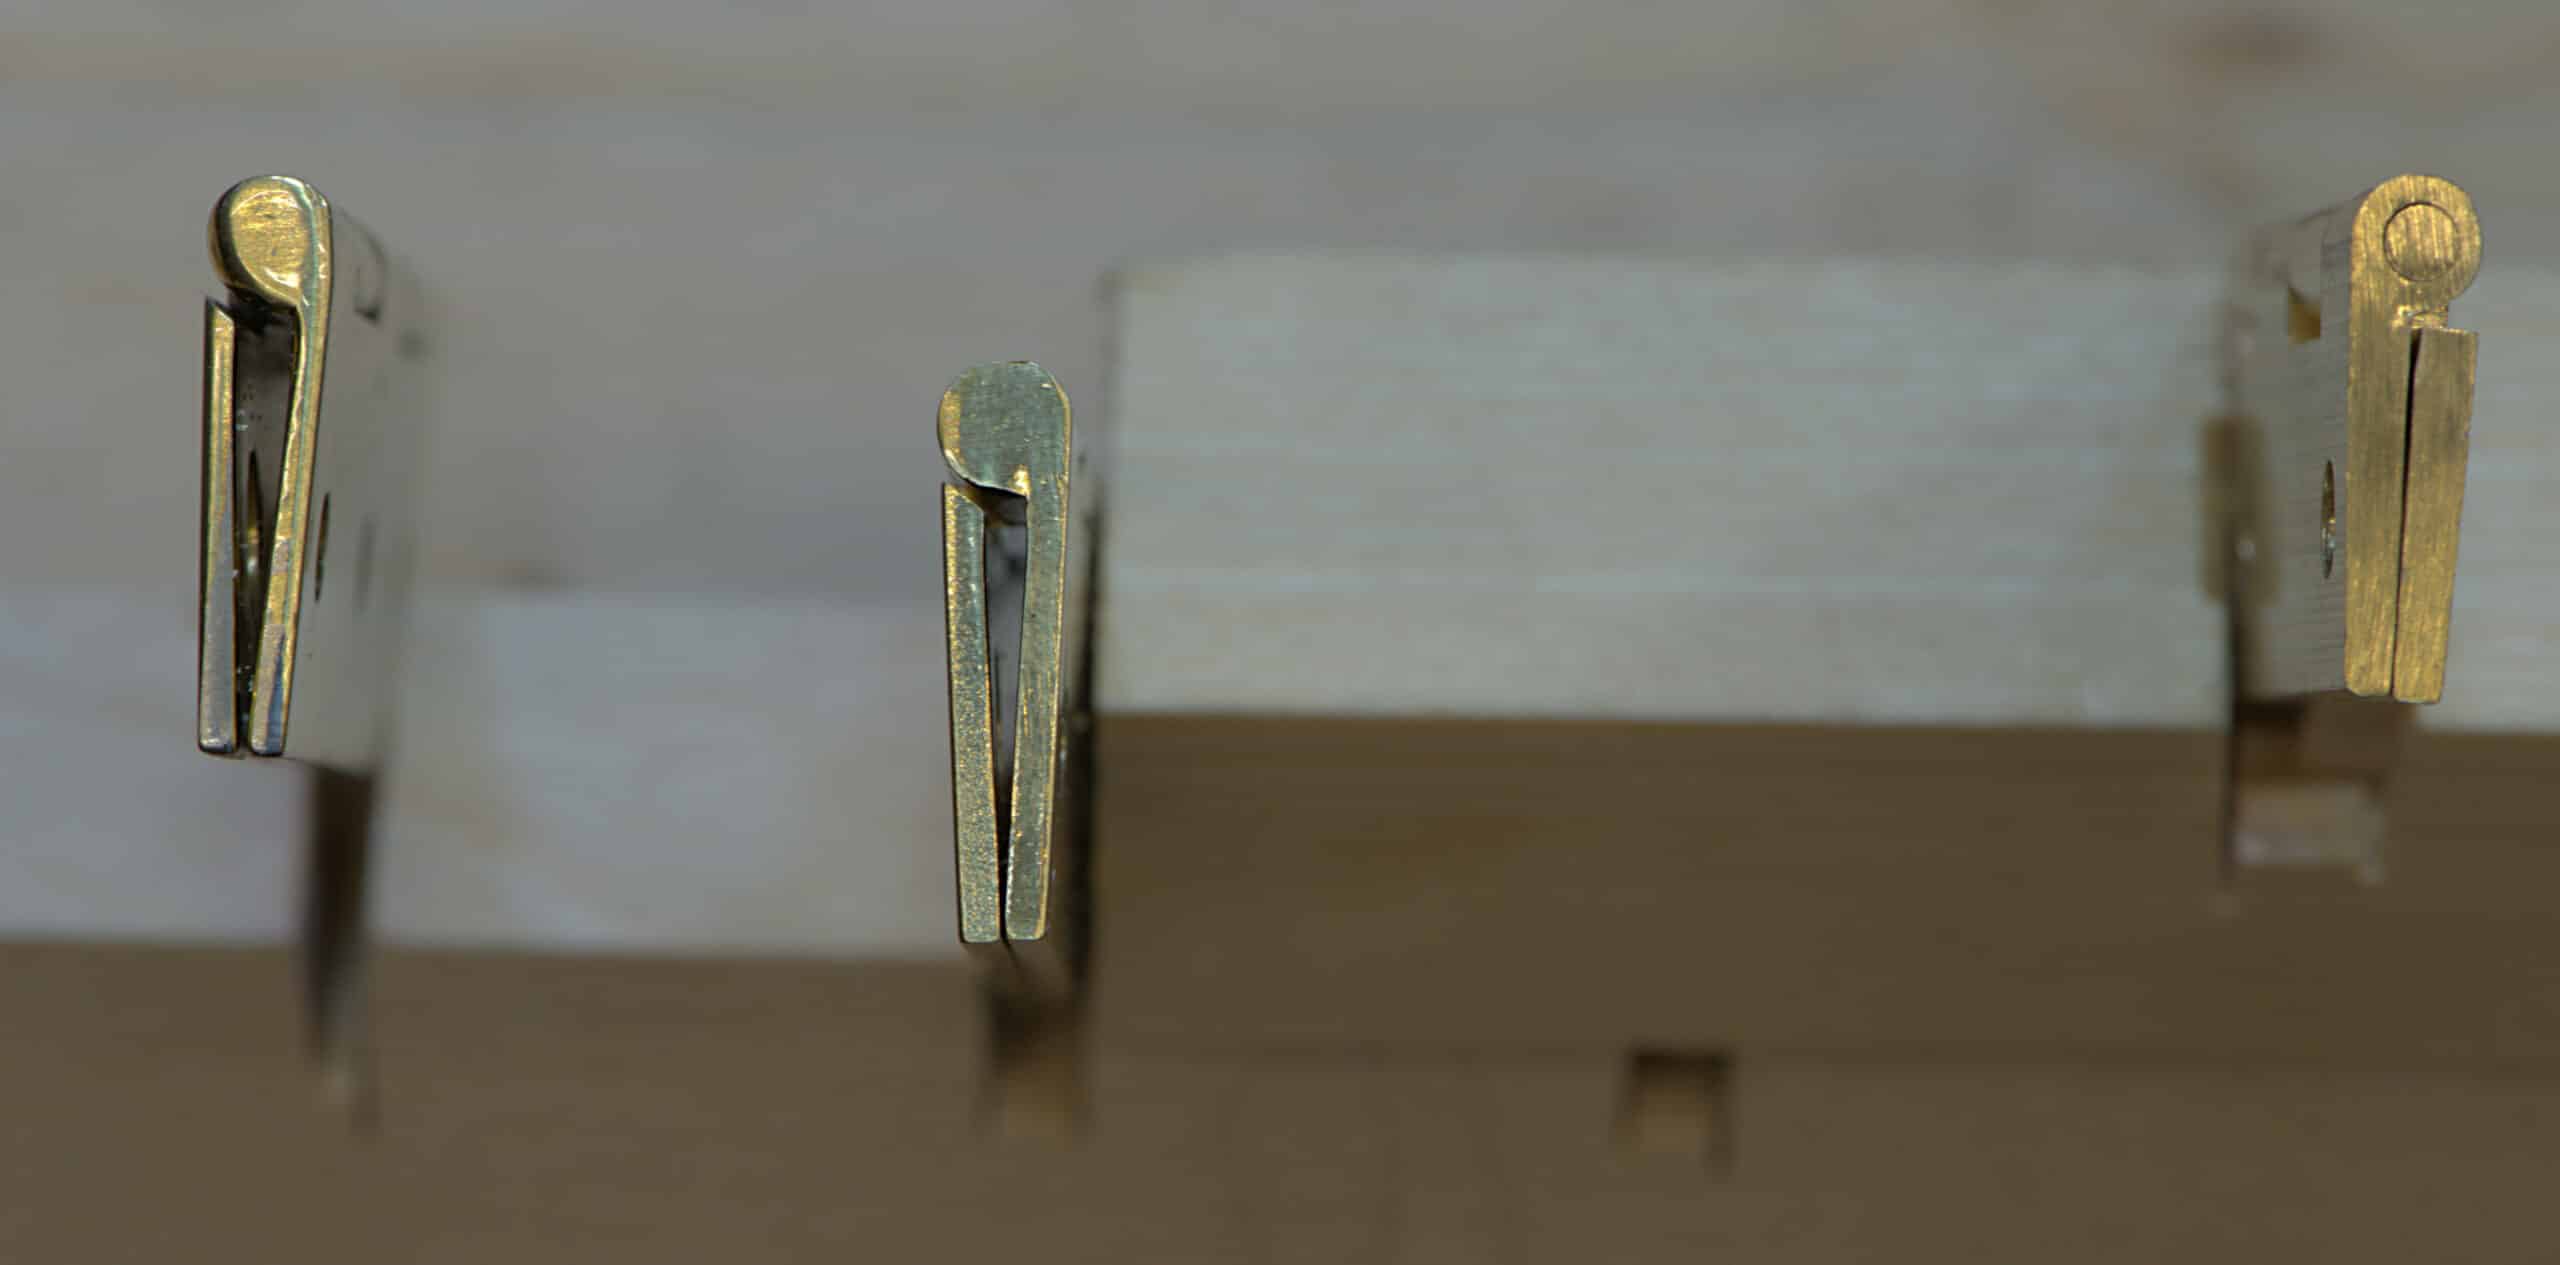 Inconsistent brass hinges